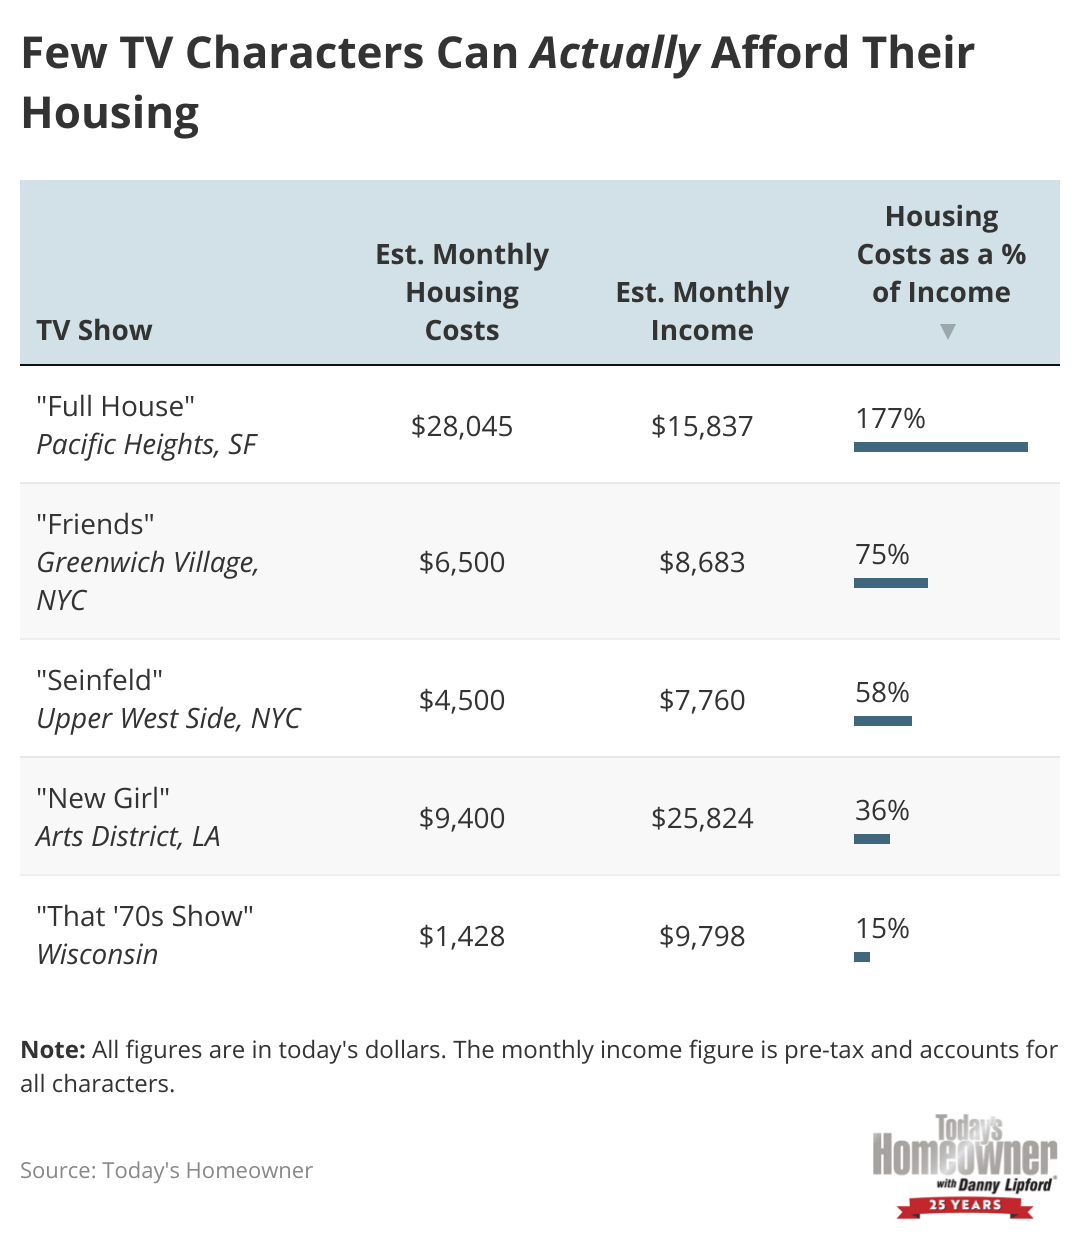 A chart comparing the estimated housing costs and income for various TV shows’ sets and casts.